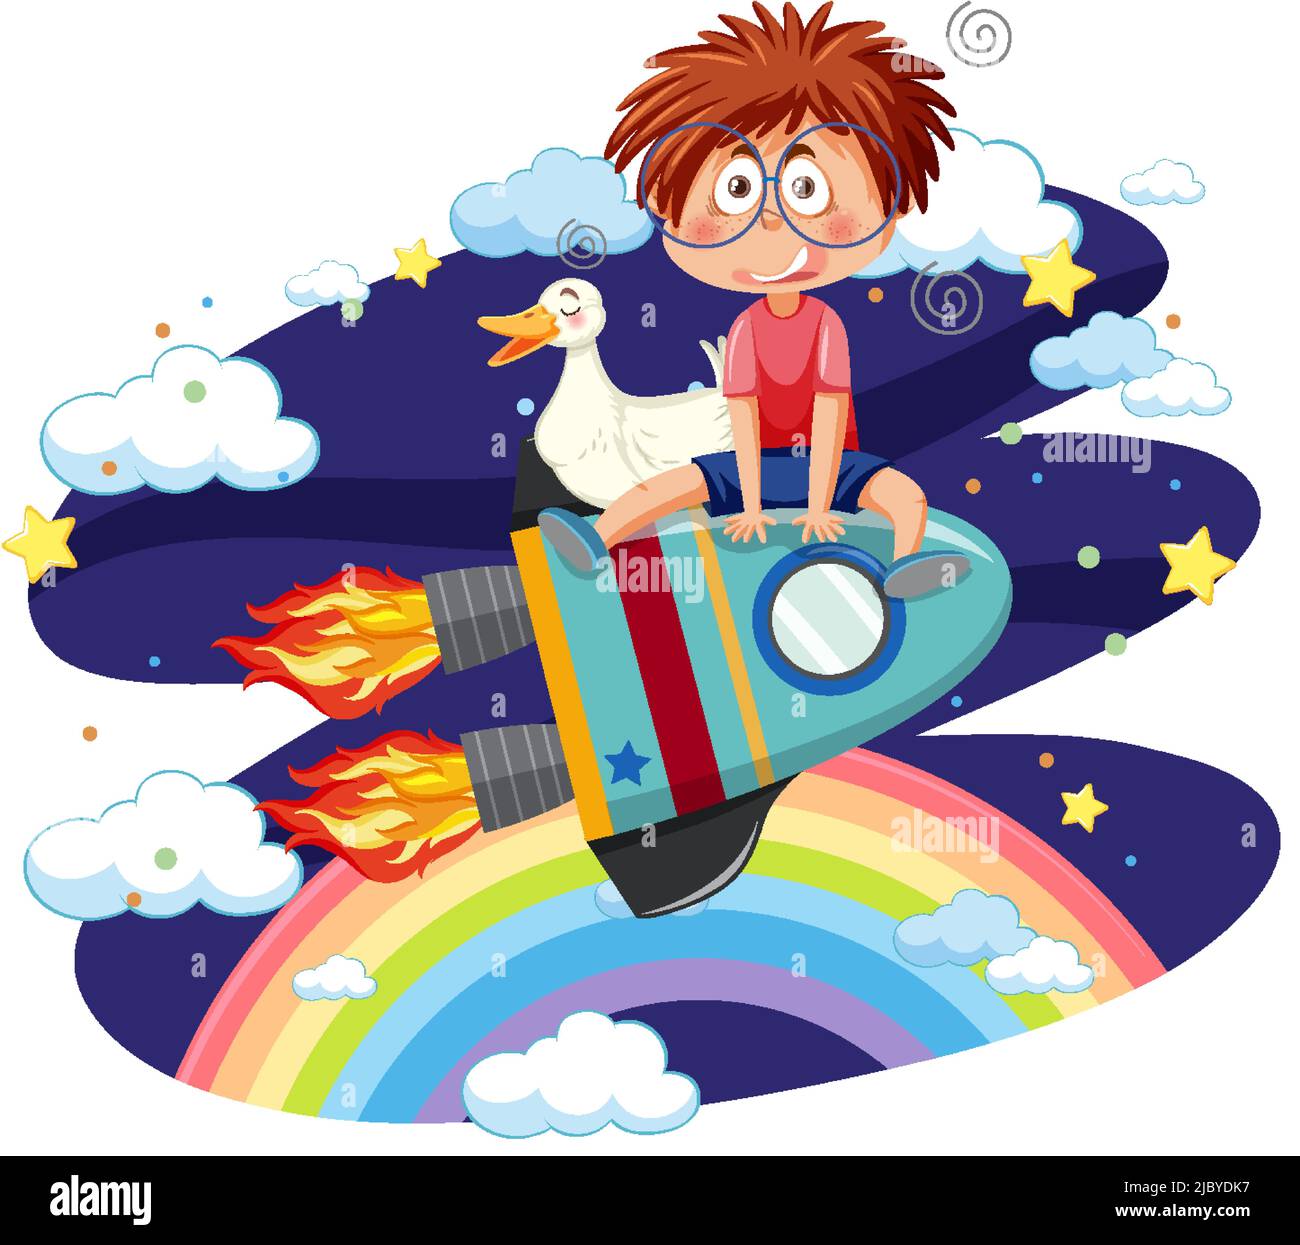 A boy and duck riding on rocket isolated illustration Stock Vector